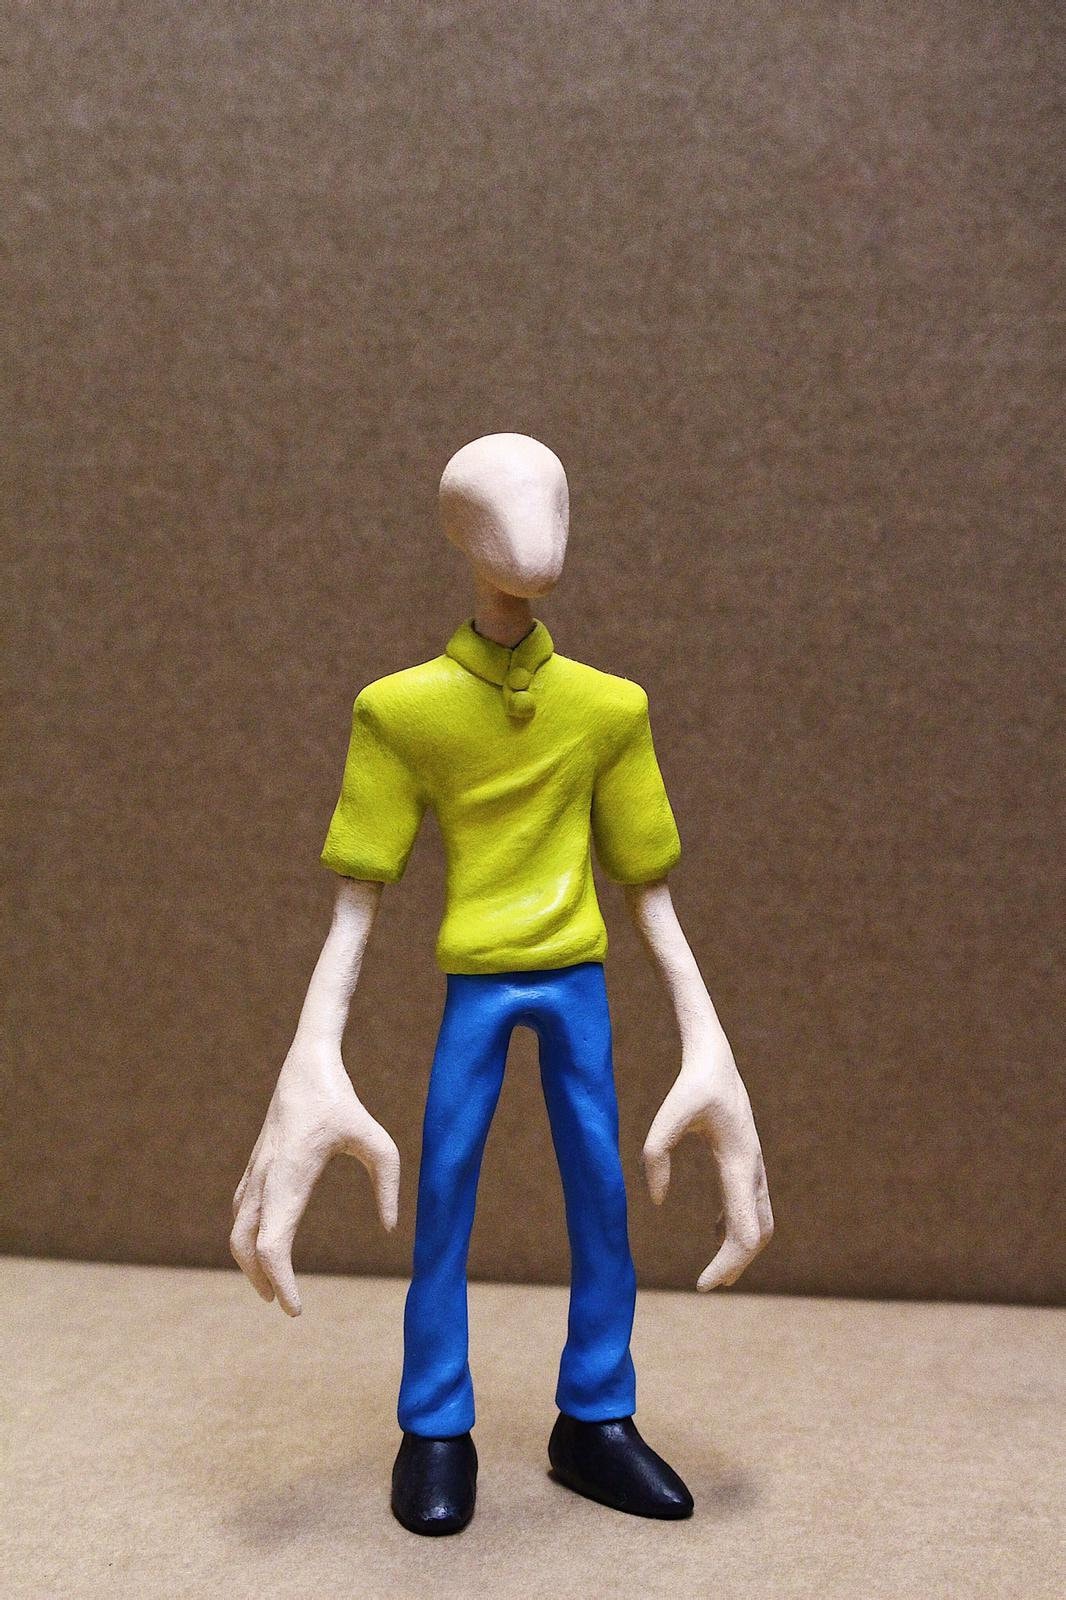 i made hubert from the roblox scp 3008, should i make the king